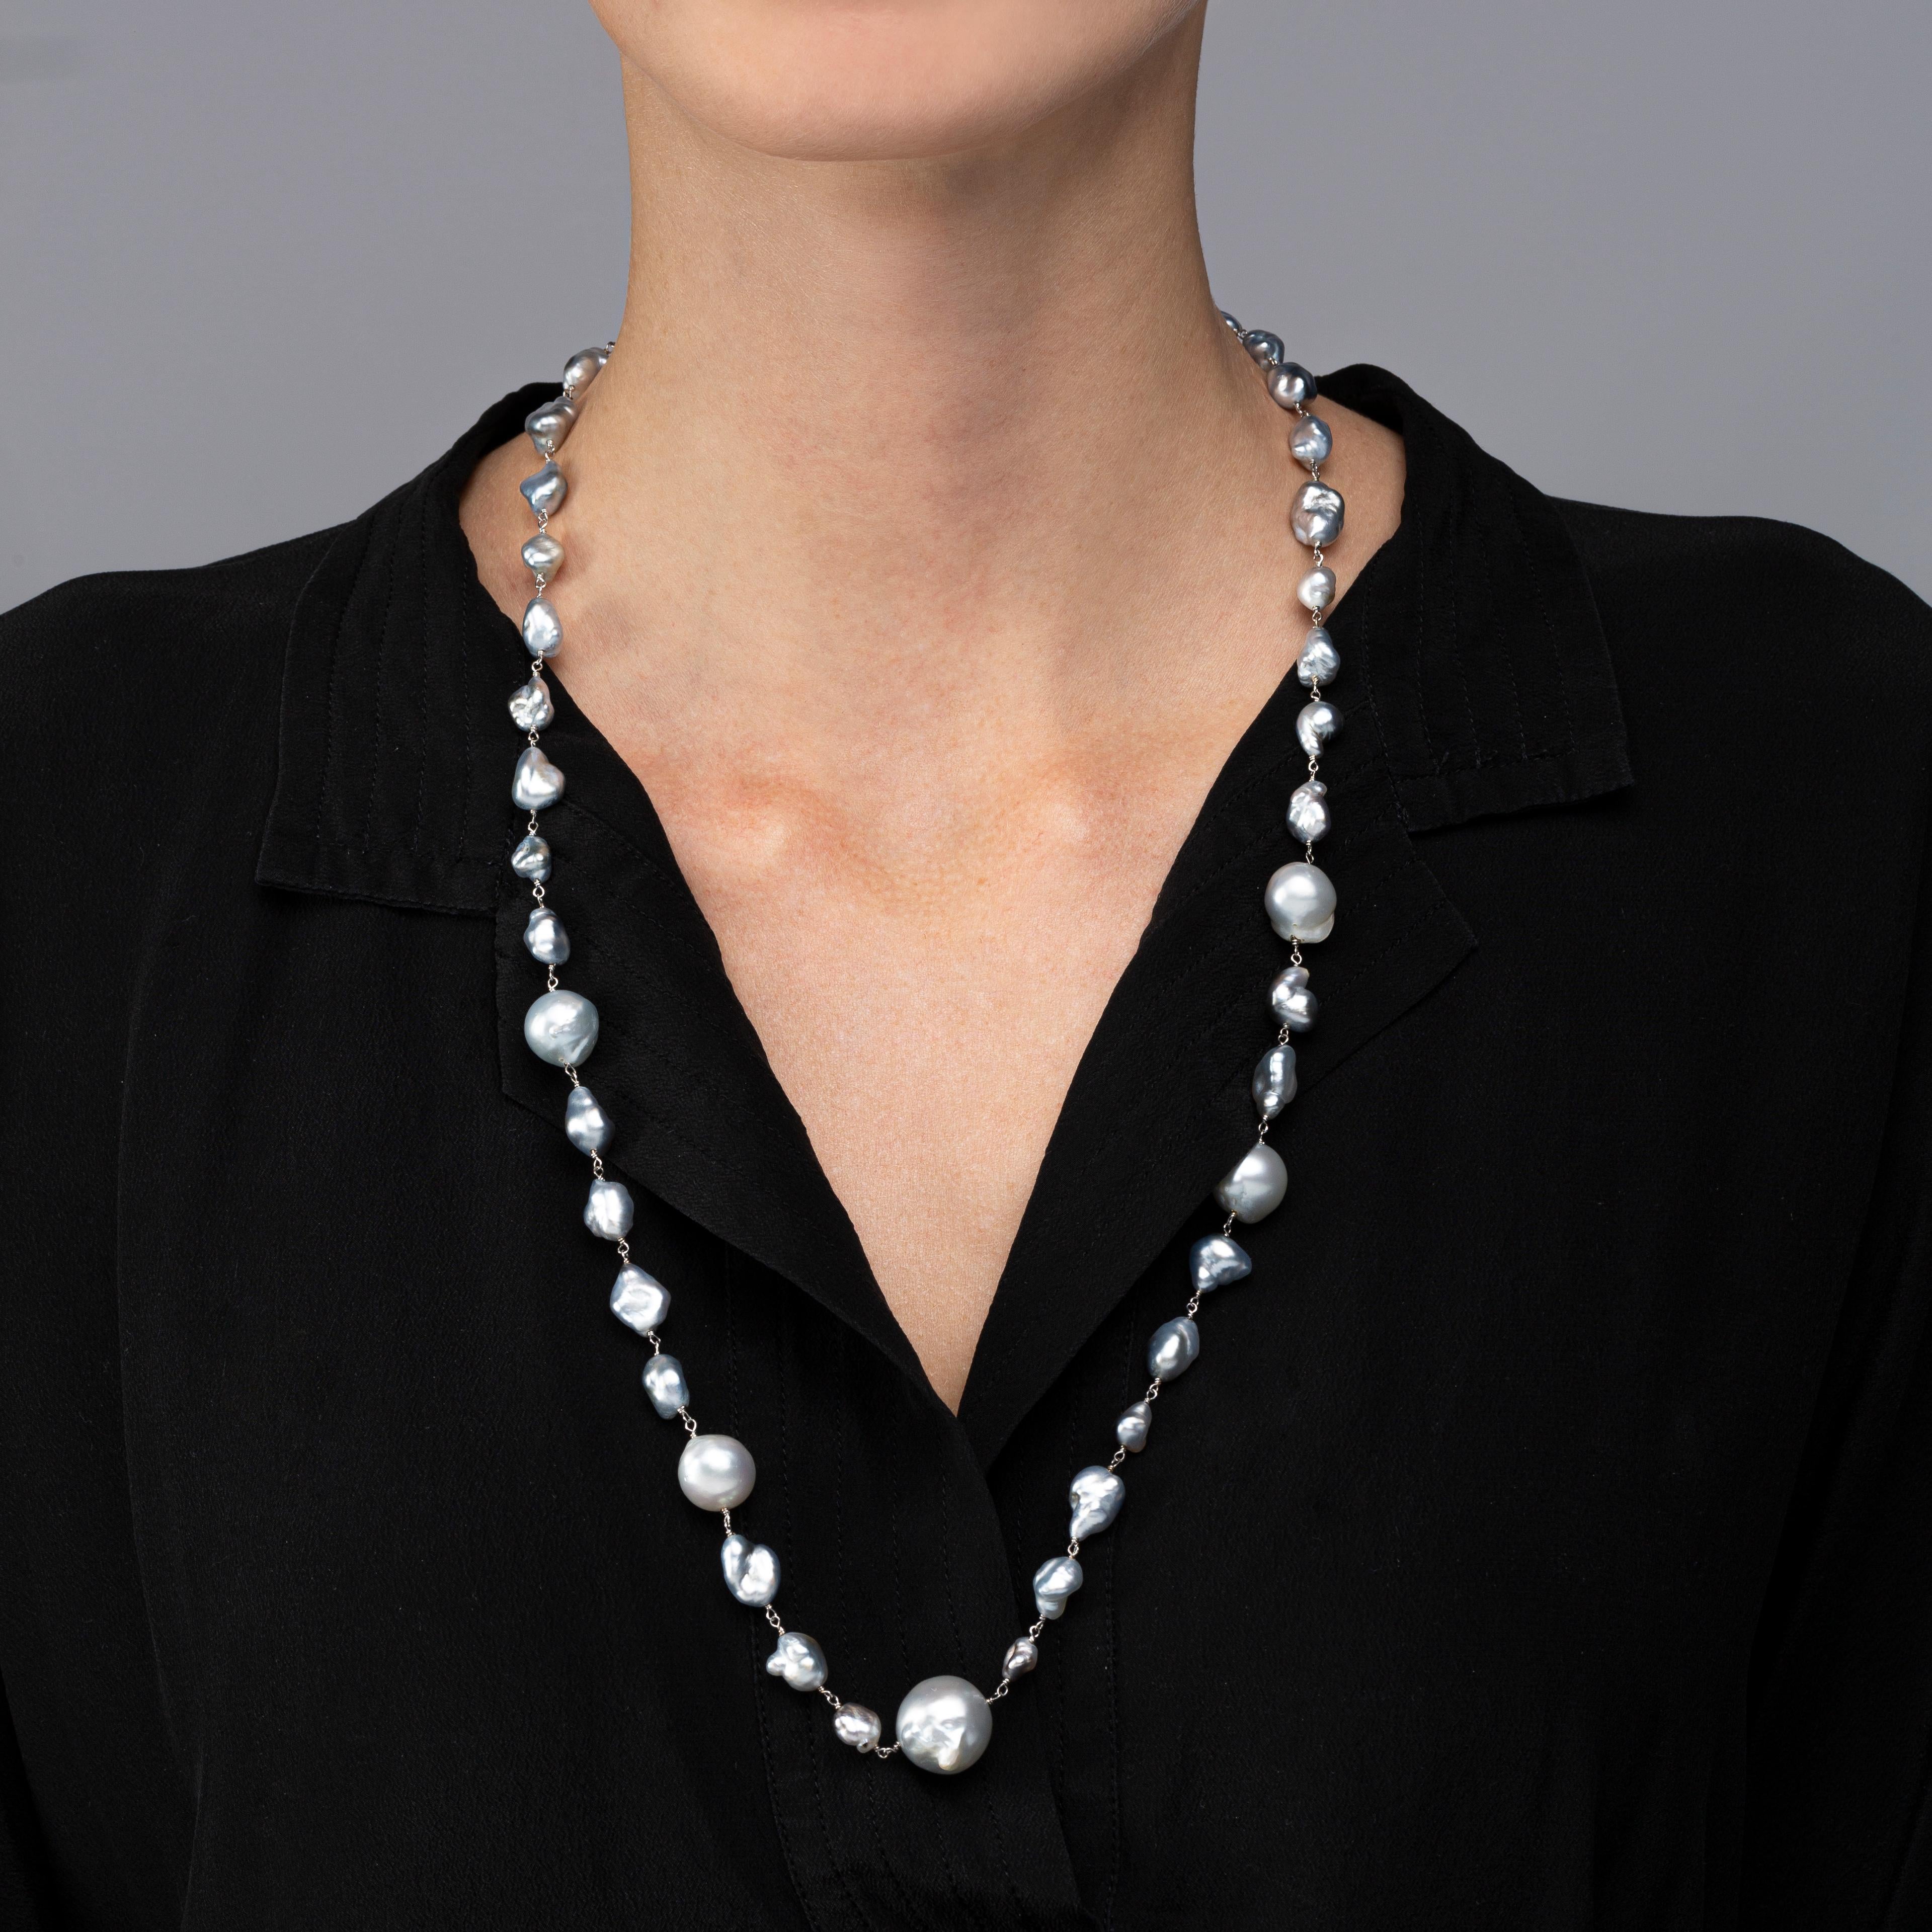 Alex Jona design collection, hand crafted in Italy, 18 karat white gold necklace featuring 45 light grey baroque South Sea pearls weighing 43.01 carats.
Dimensions: 28.34 in. L x 0.69 in. W - 72 cm. L x 1.7 cm. W

Alex Jona jewels stand out, not